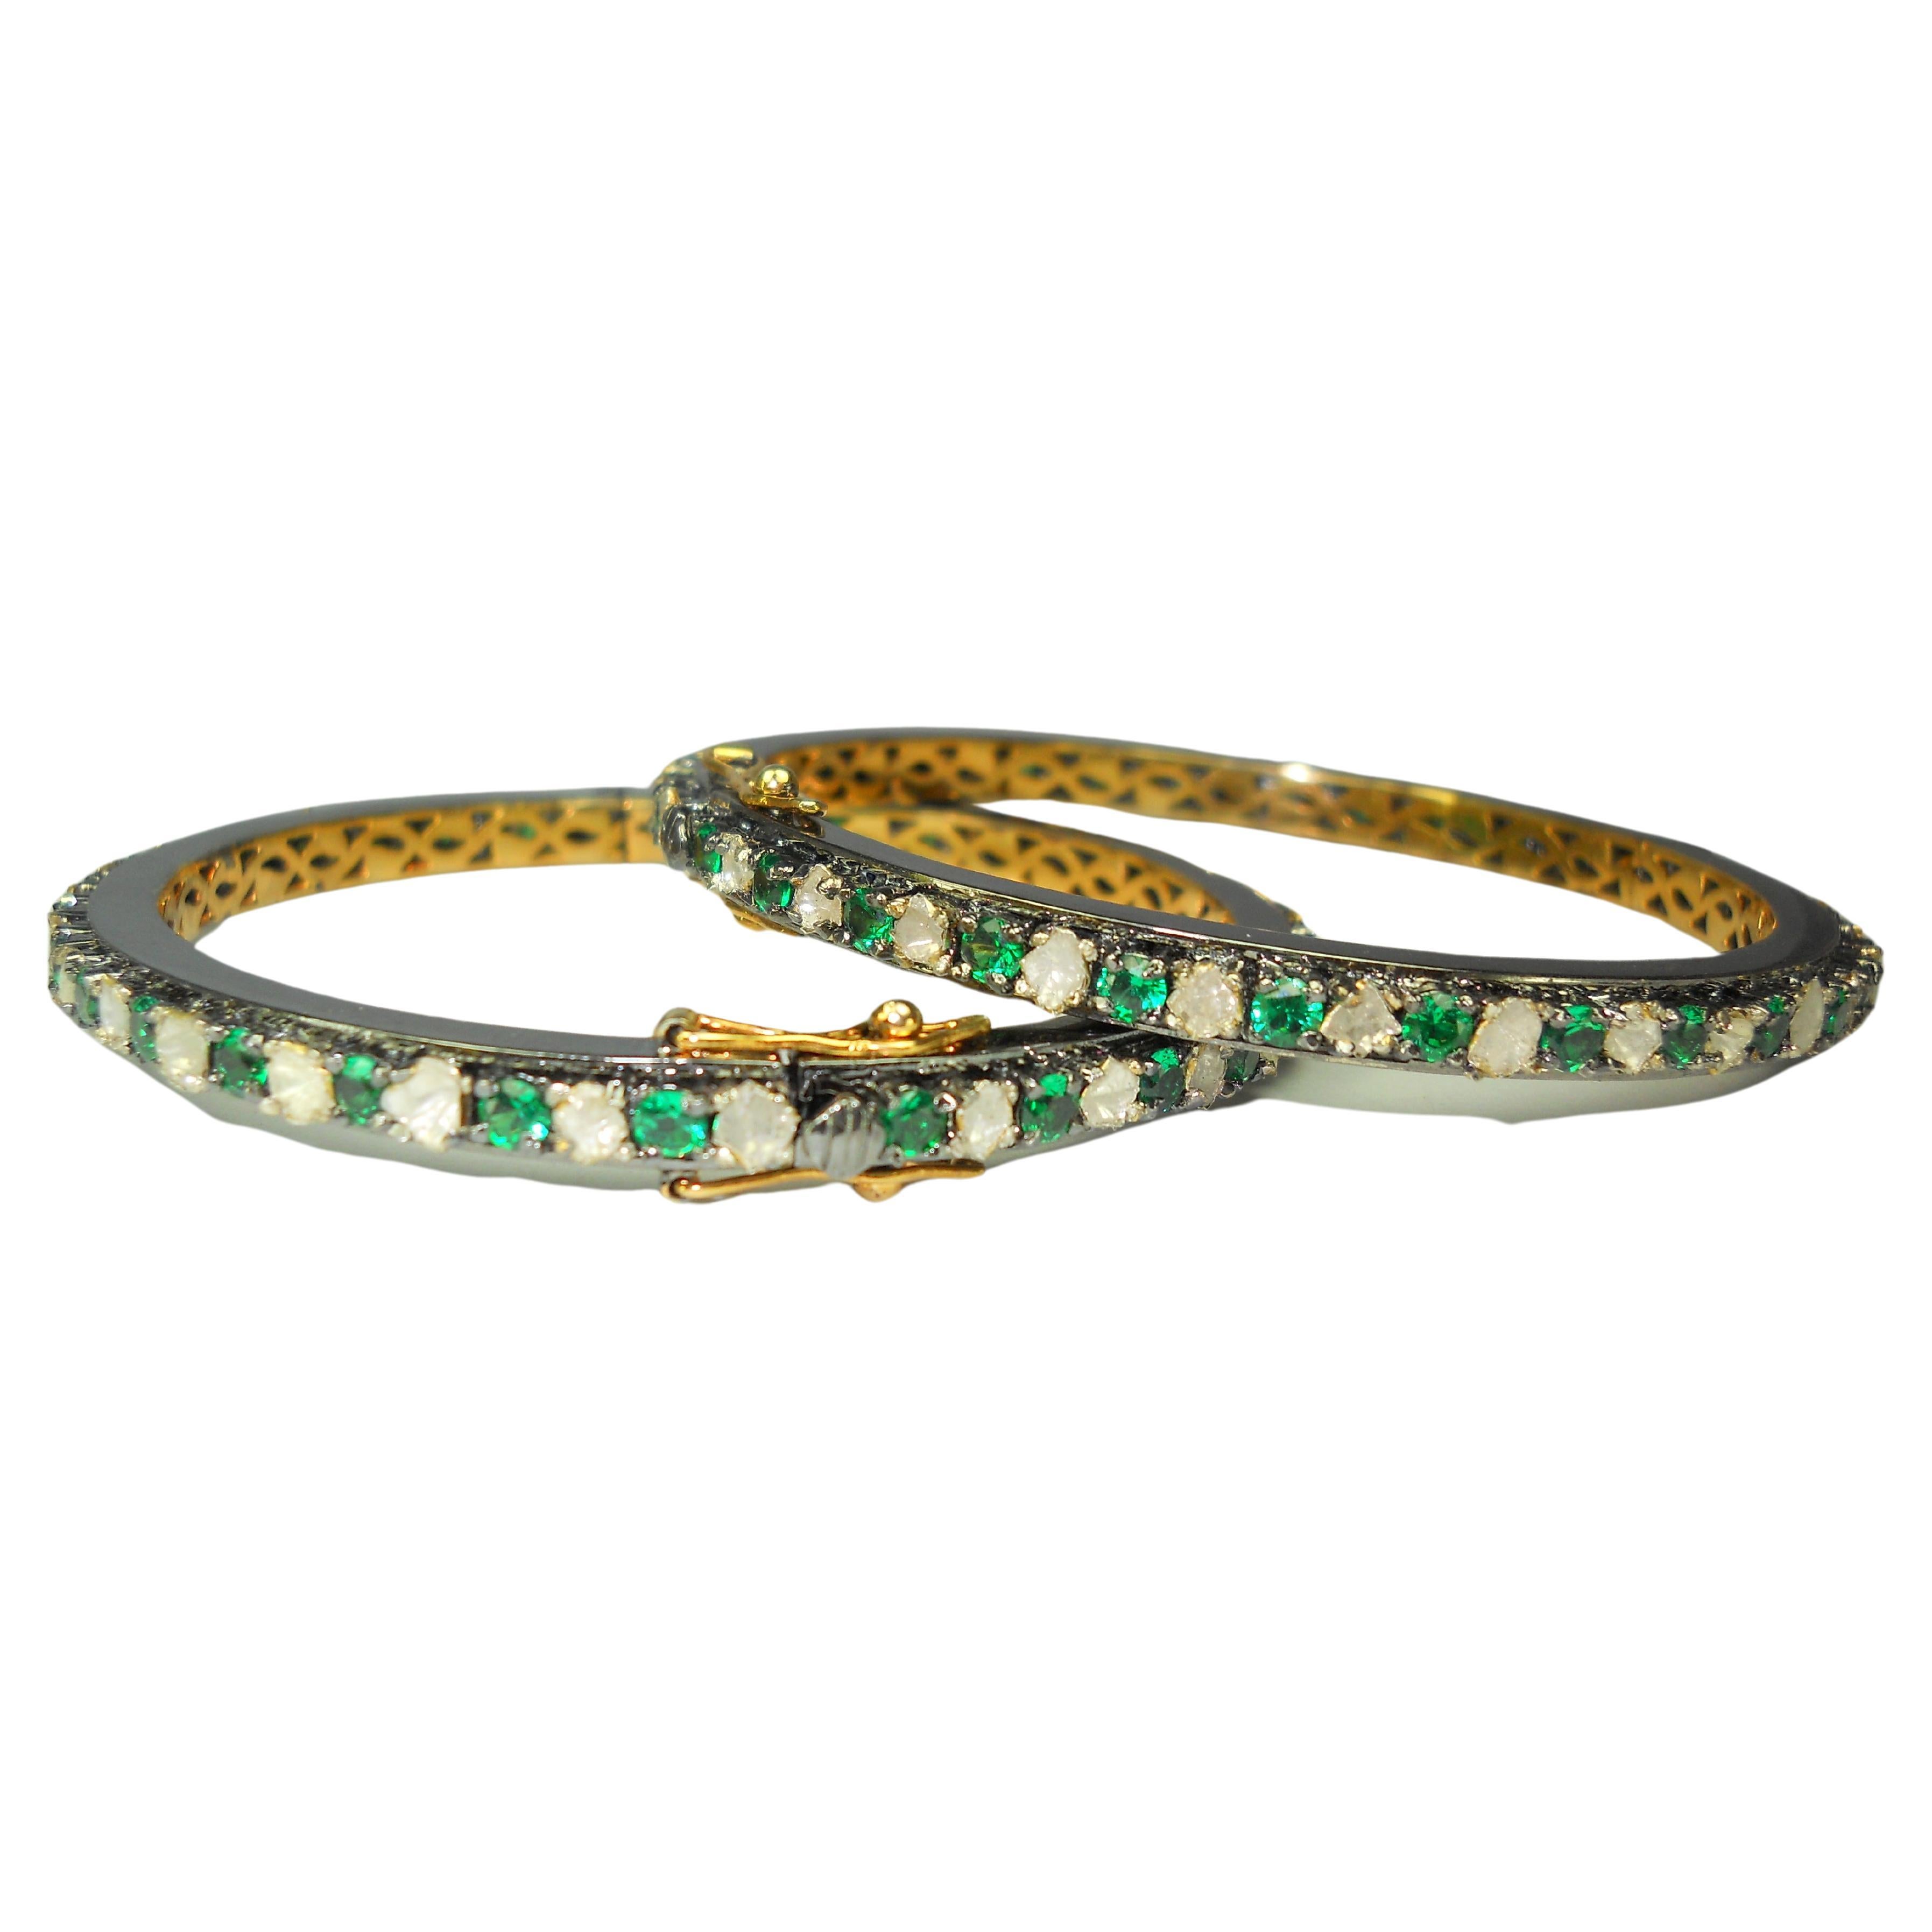 Pair of natural Diamond emerald sterling silver hinge bracelet Yellow Gold plate